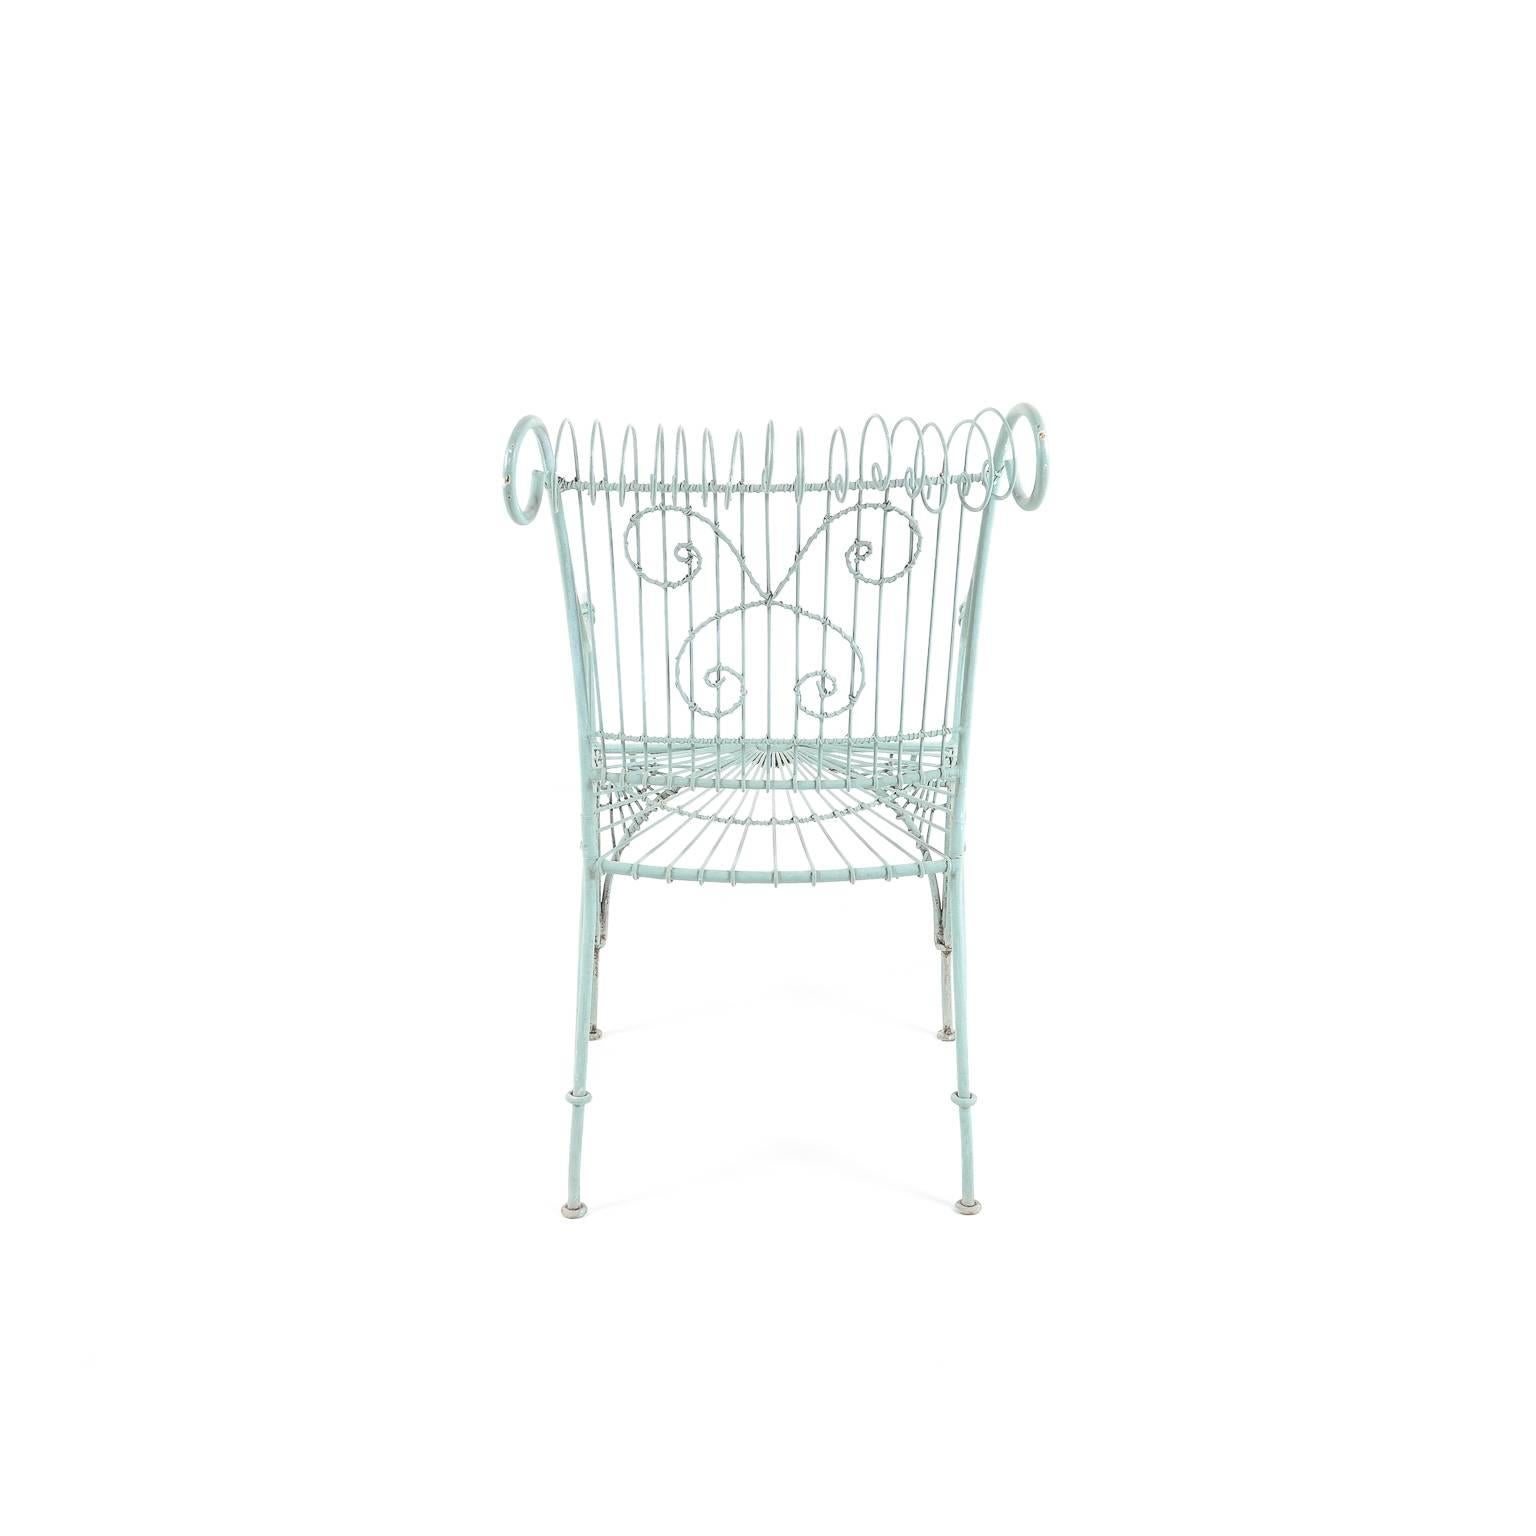 Early 20th Century French Antique Wrought Iron Patio Chairs, circa 1930, from Paris